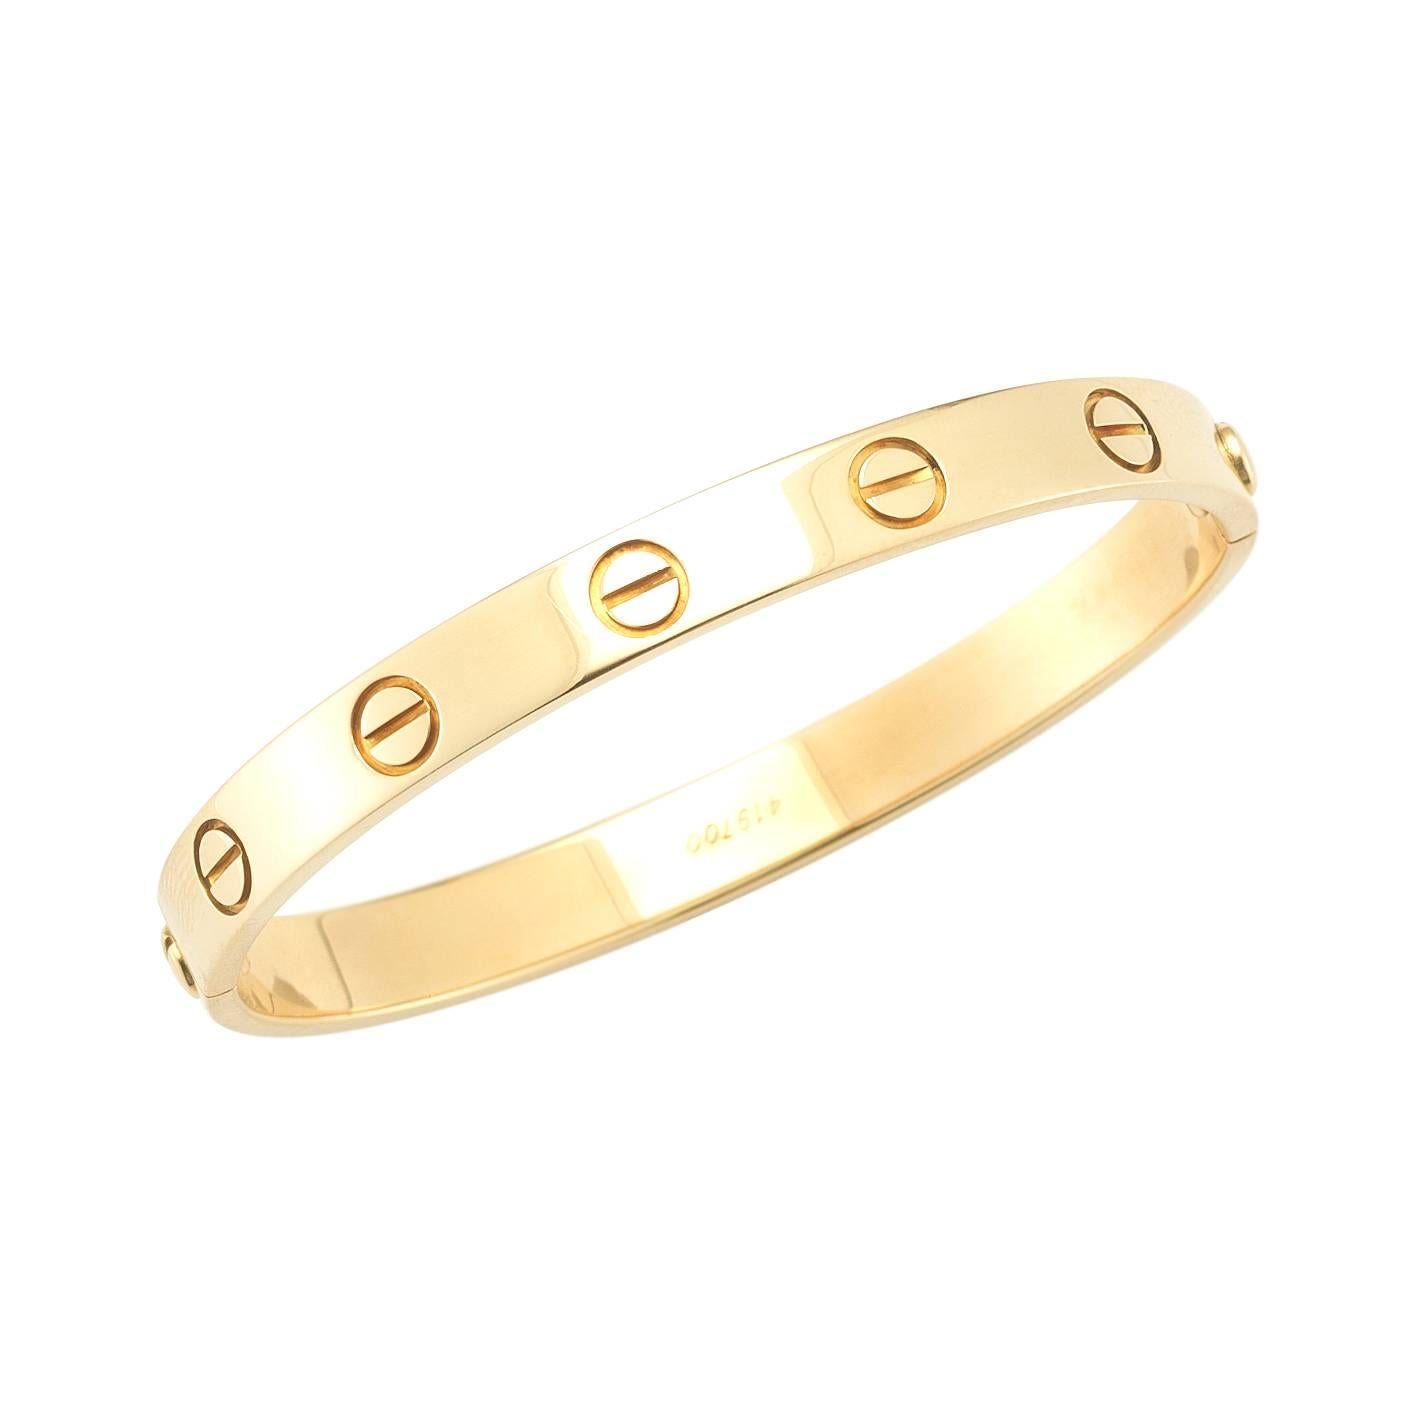 A classic, highly coveted Love bracelet by prestigious jeweler Cartier. This beautiful bracelet is a signature Cartier piece, and can be worn day and night. This particular bracelet has an old personal engraving on it - can easily be buffed out.